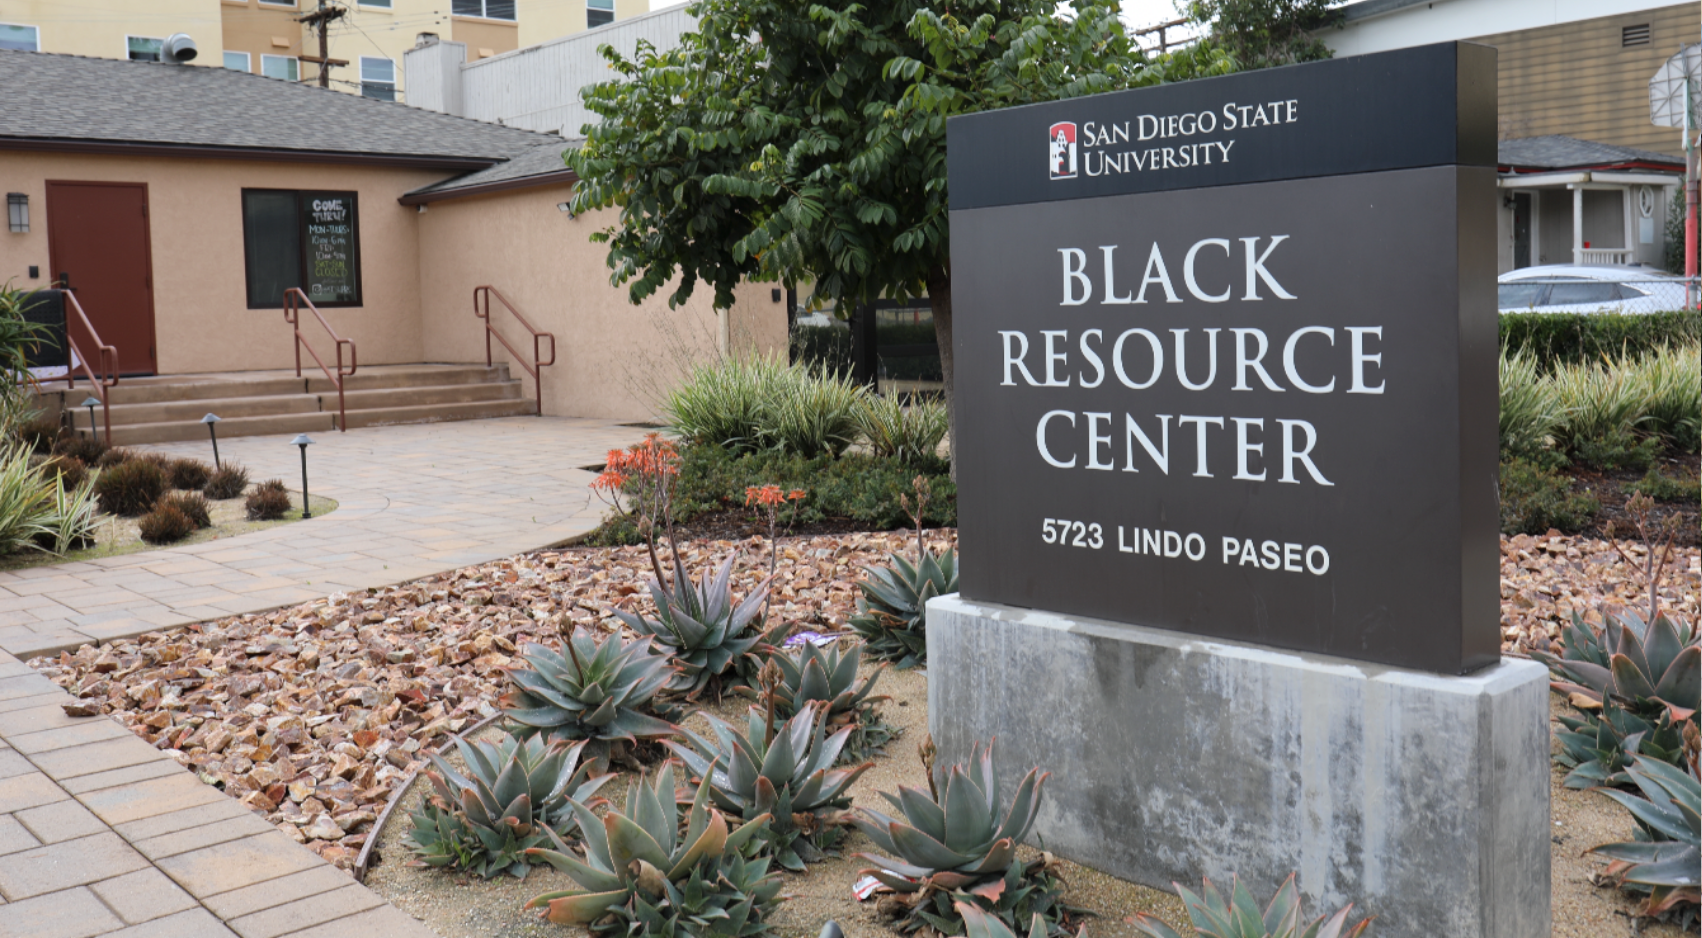 The BRC, located at 5723 Linda Paseo, provides a safe and welcoming environment for students, staff, and faculty of the African Diaspora. (SDSU)